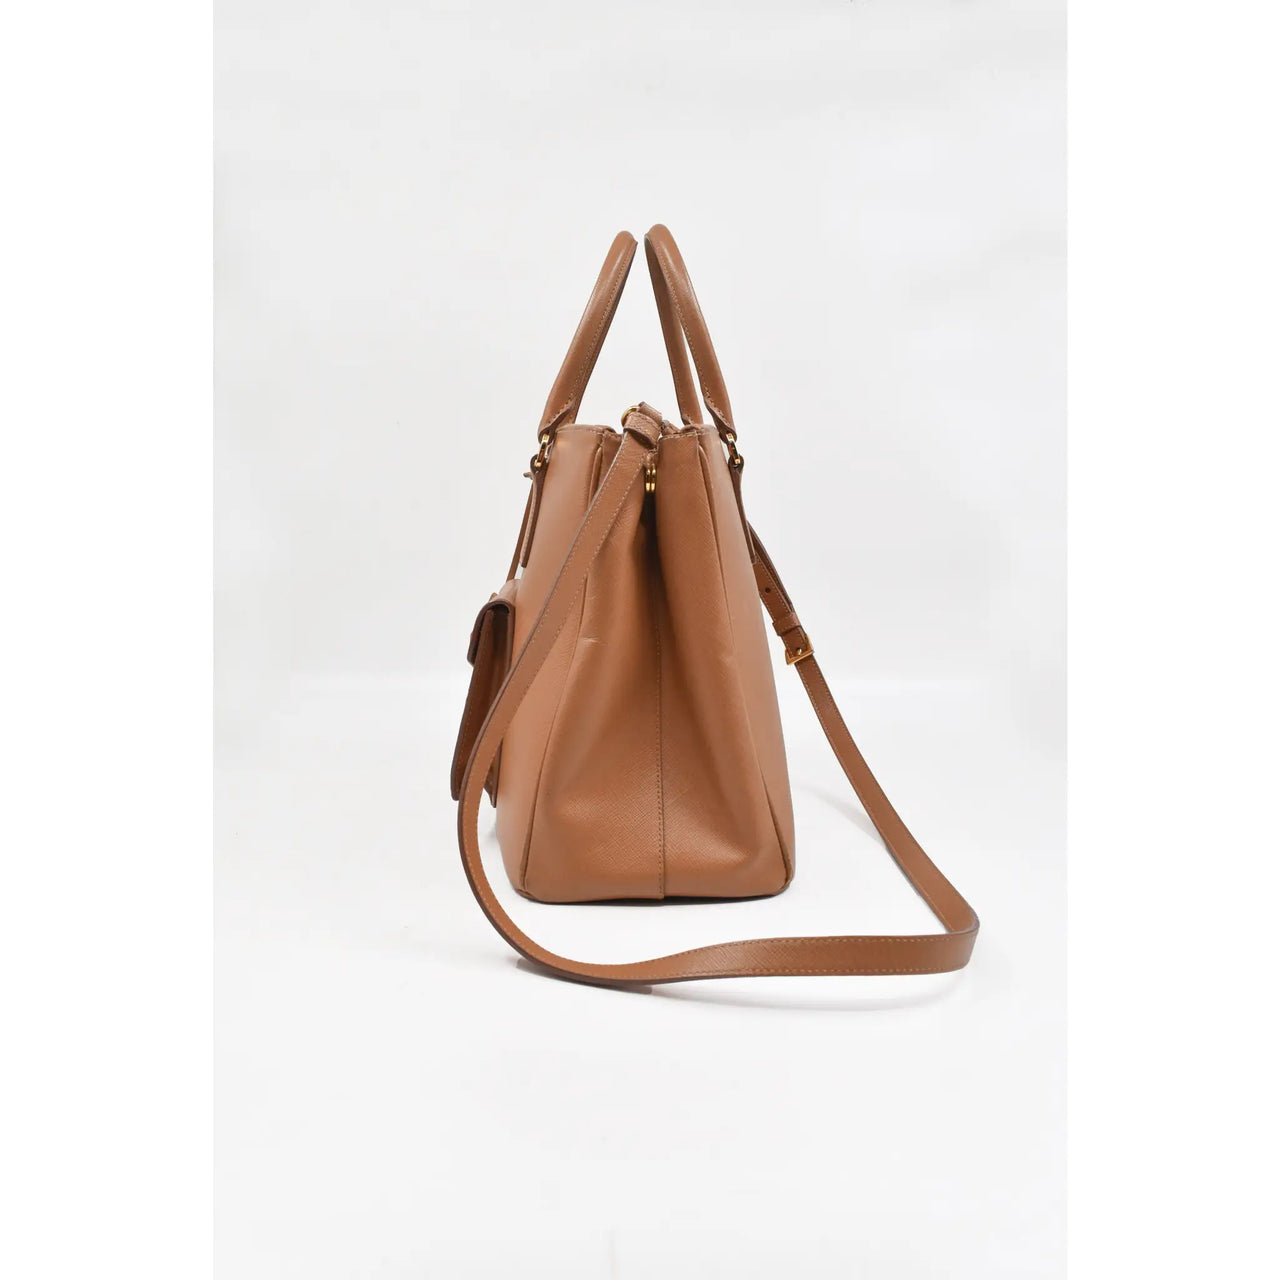 Prada Camel Saffiano Leather Front Pocket Double Zip Tote